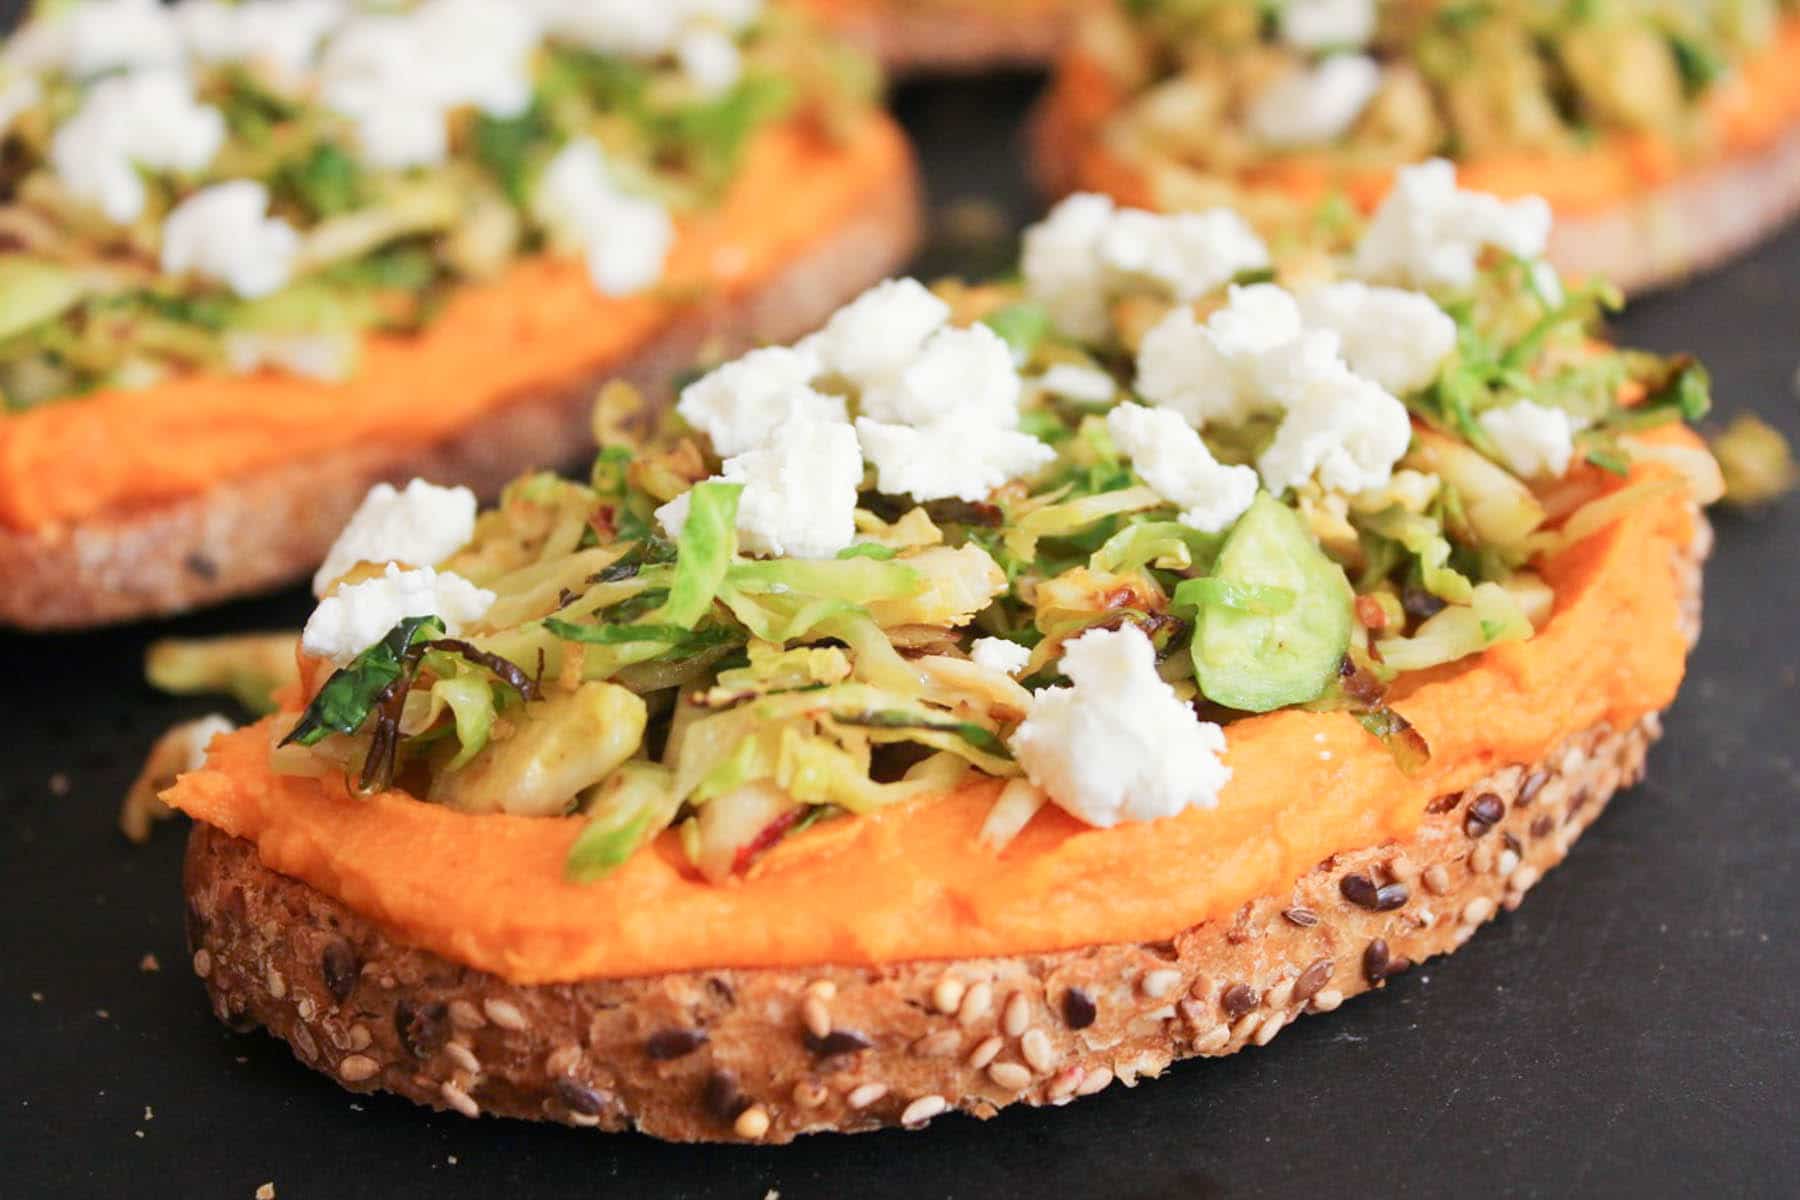 Sweet-Potato-Hummus-Tartine-with-Toasted-Brussels-Sprouts-and-Goat-Cheese-8